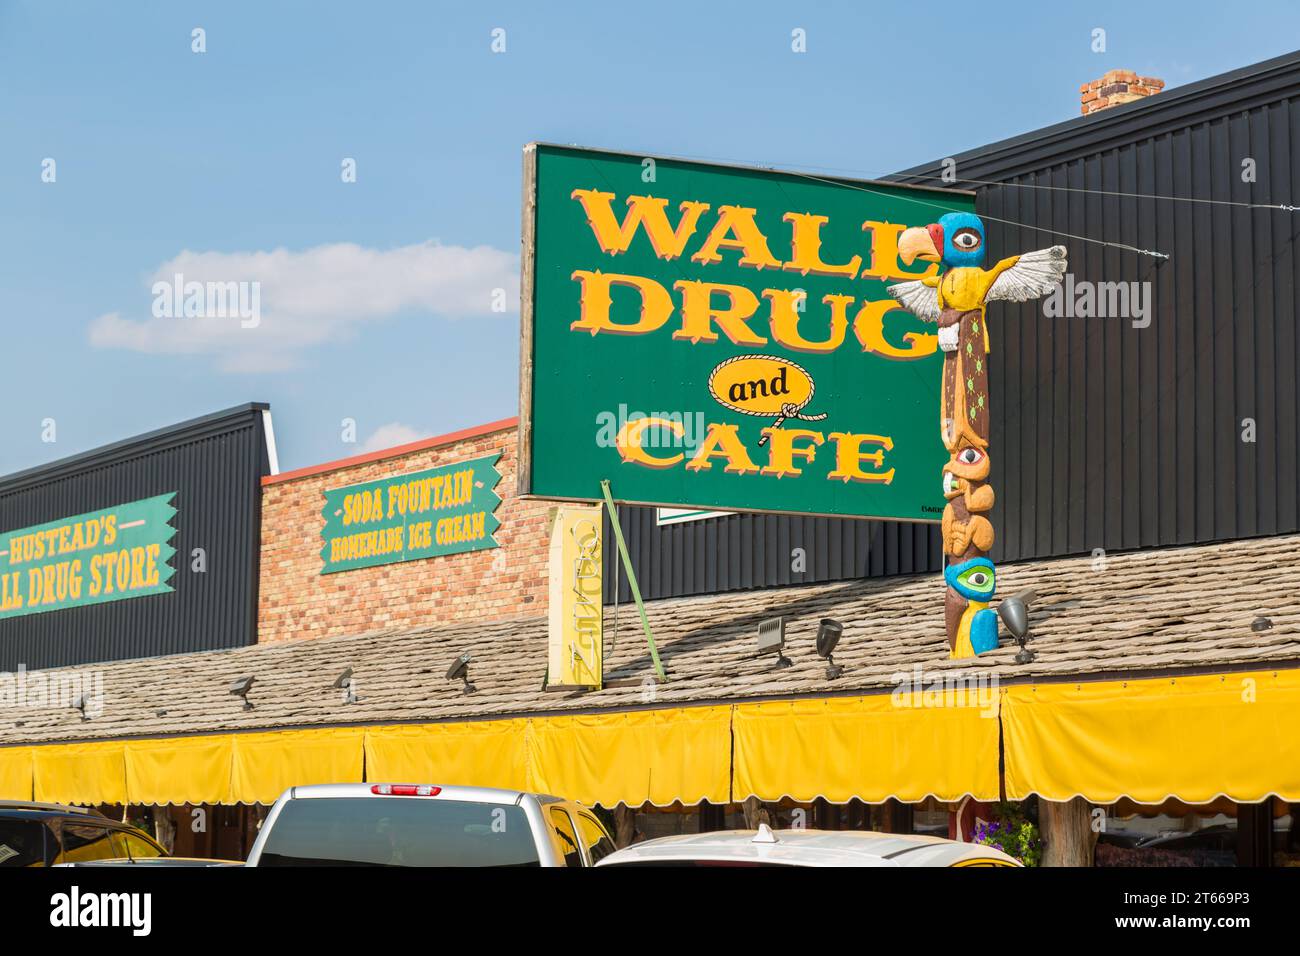 Storefront sign for historic Wall Drug Store in Wall, South Dakota, USA Stock Photo